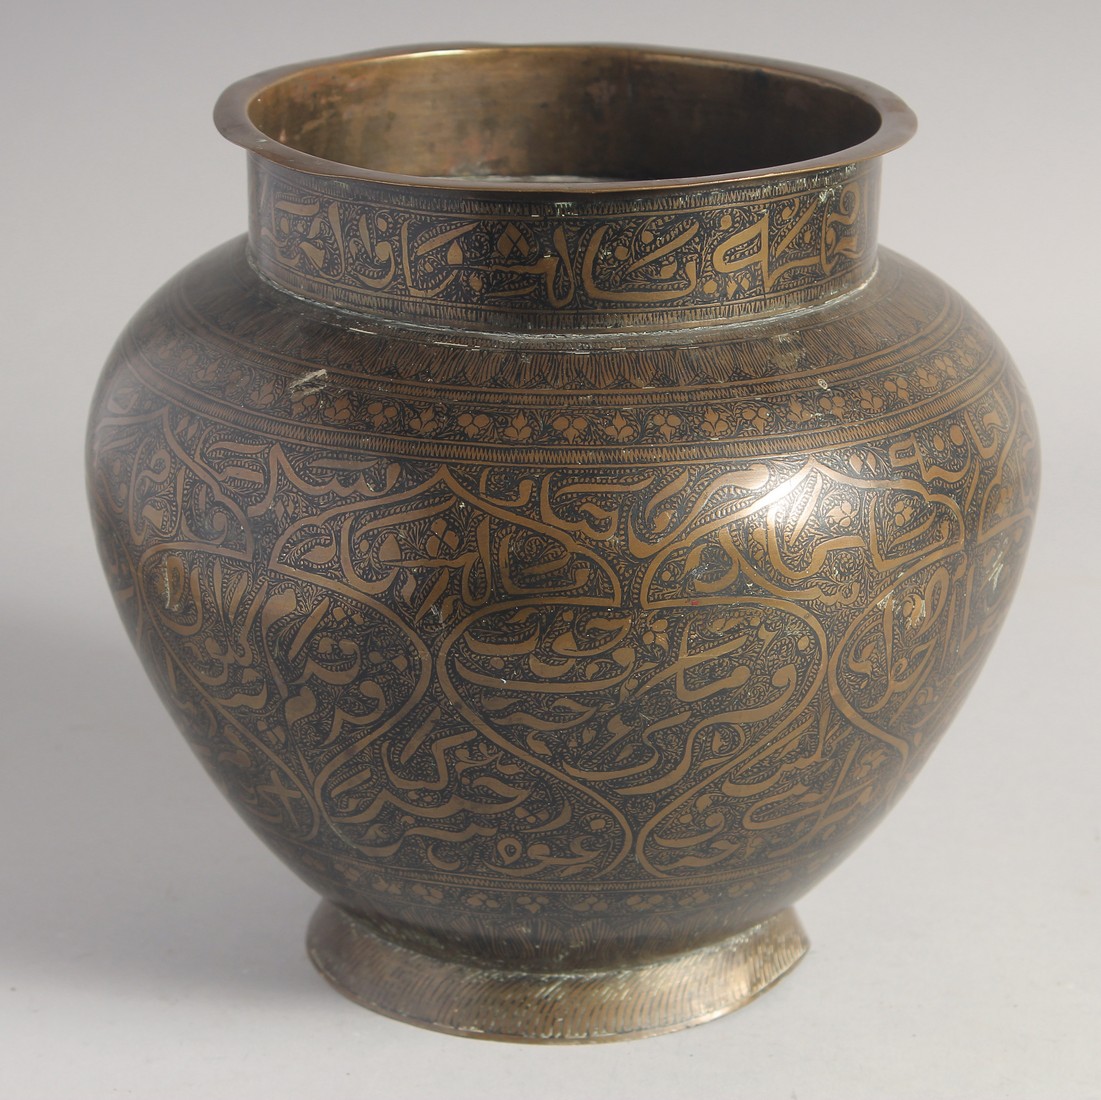 A 19TH CENTURY BLACK ENAMELLED BRASS CALLIGRAPHIC VASE. 21cm high, together with AN ISLAMIC ENGRAVED - Image 6 of 9